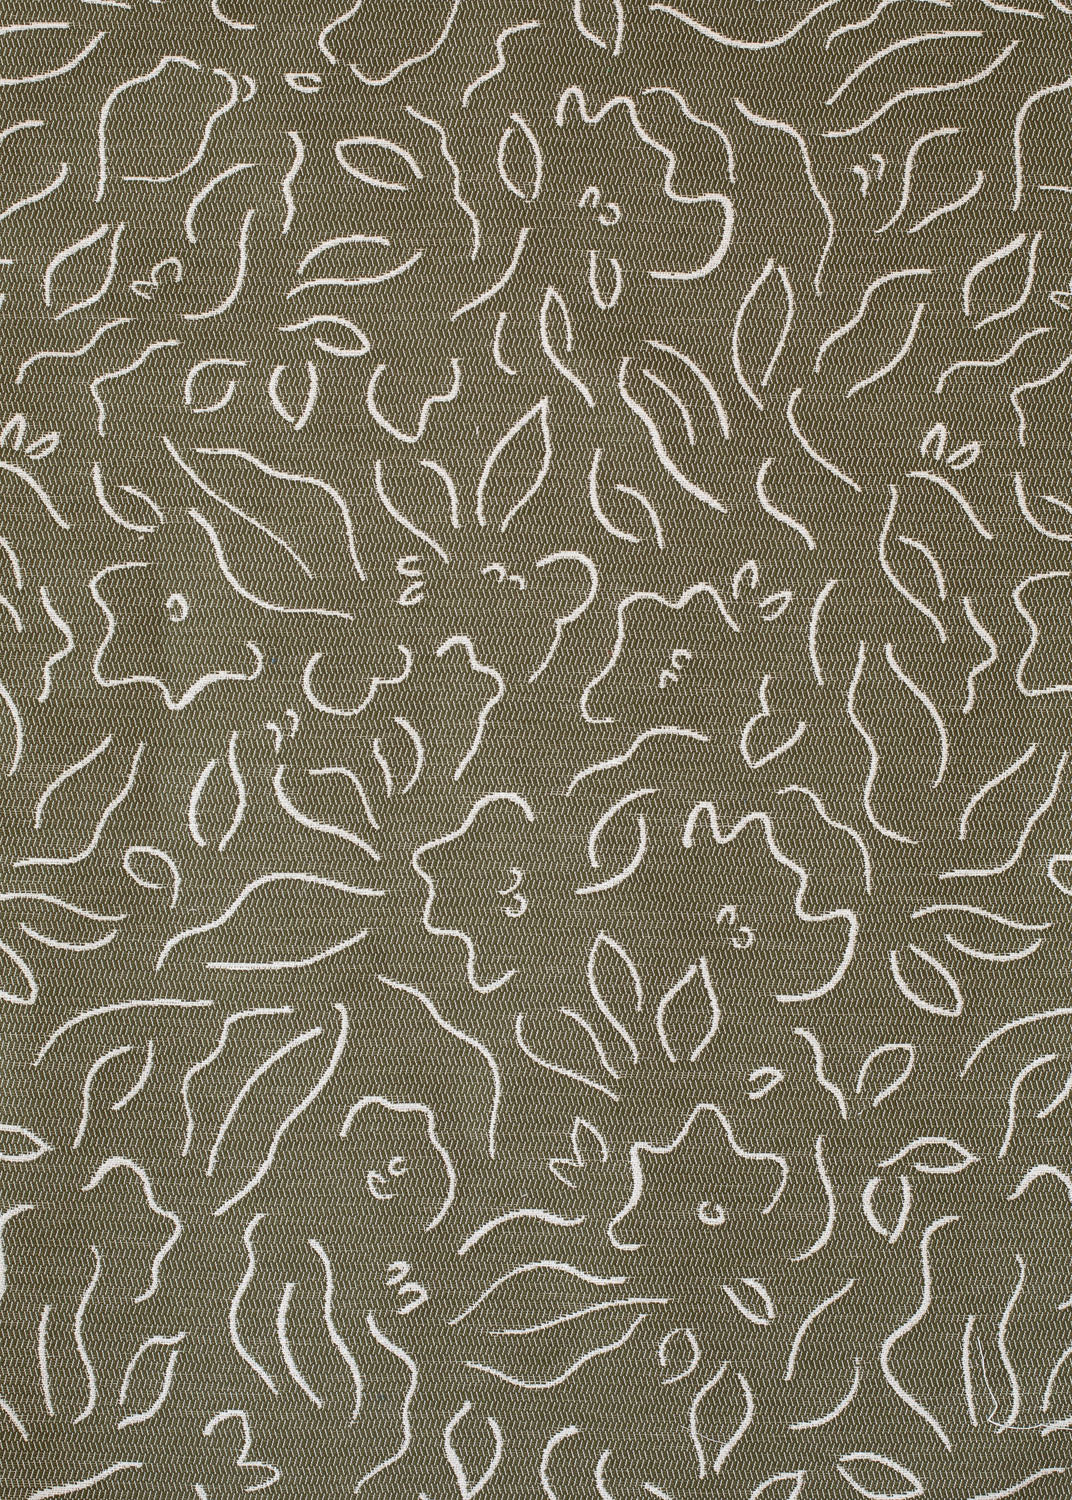 Detail of fabric in a minimalist floral print in cream on an olive field.